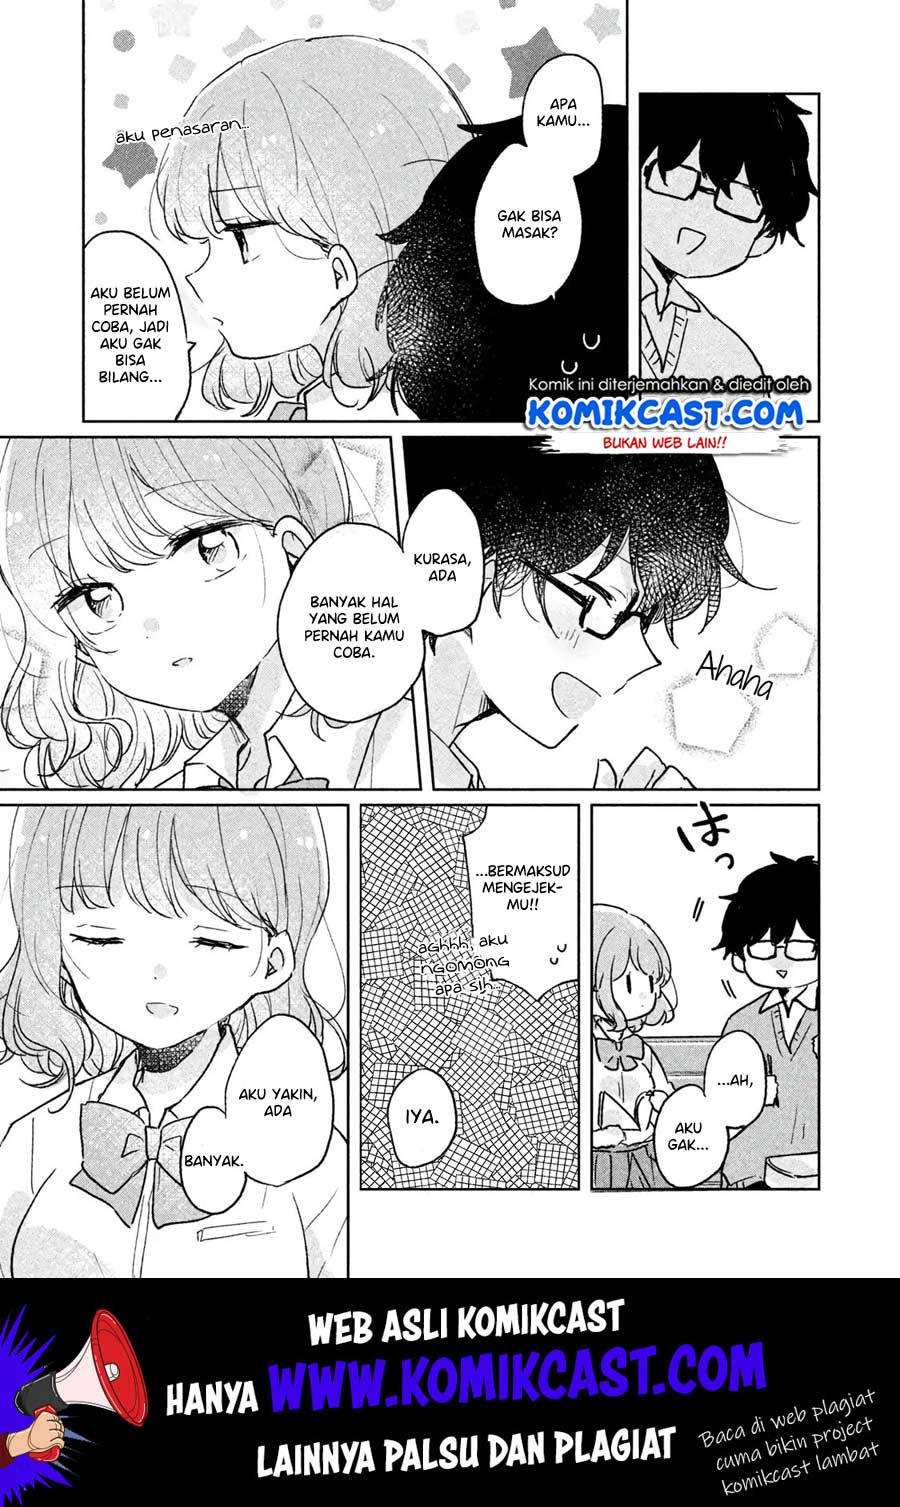 It’s Not Meguro-san’s First Time Chapter 7